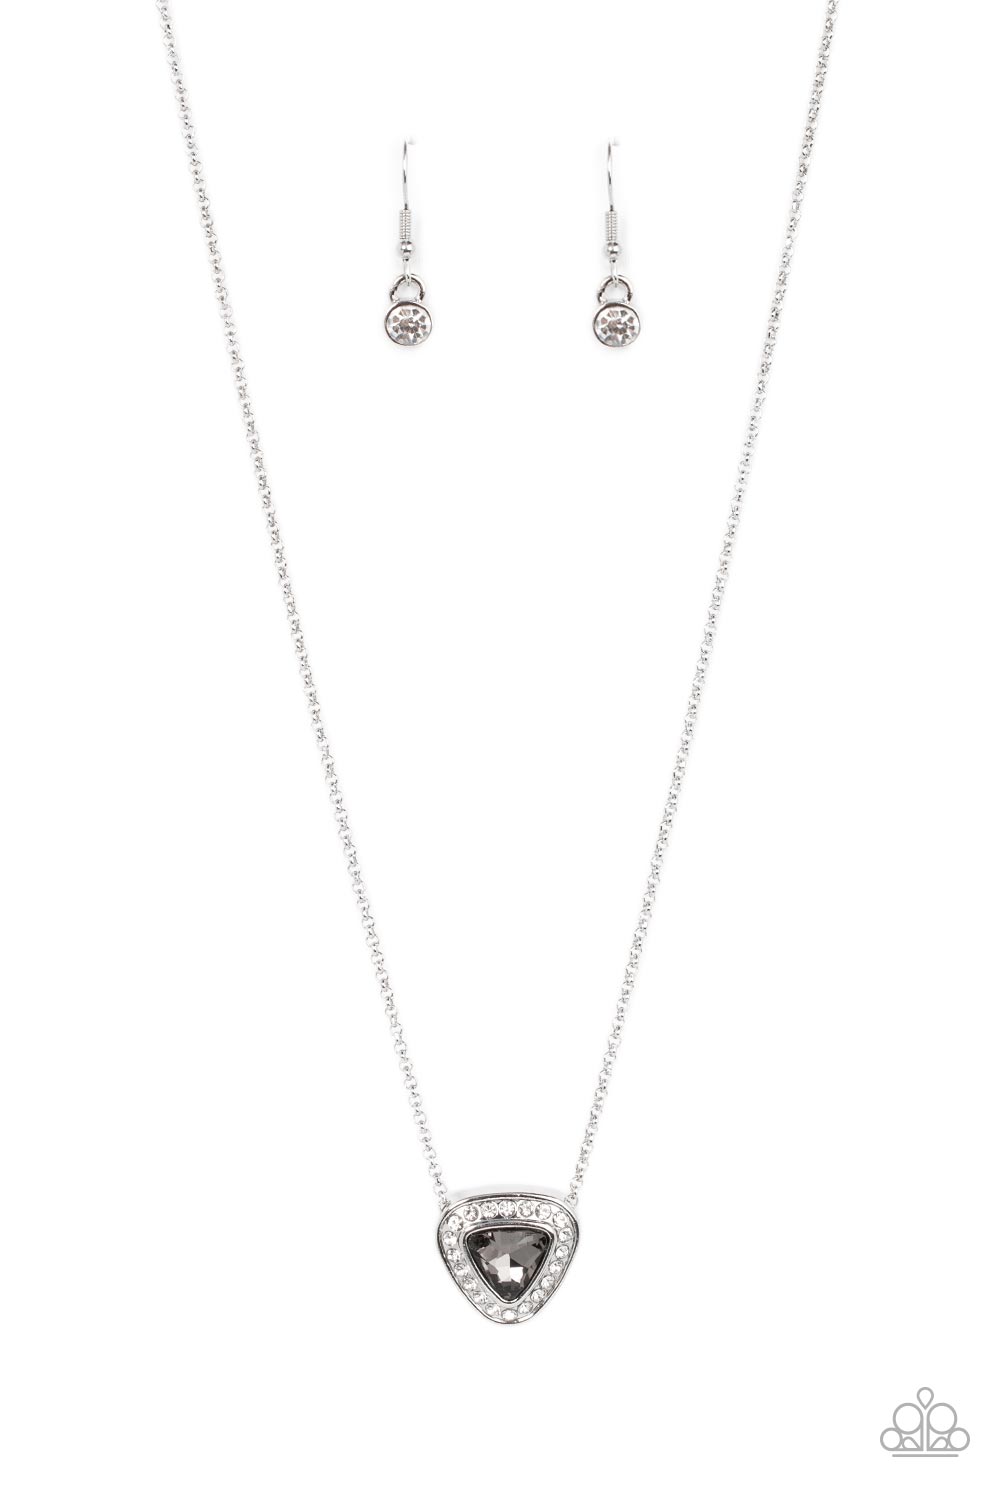 The Whole Package - Silver Paparazzi Necklace